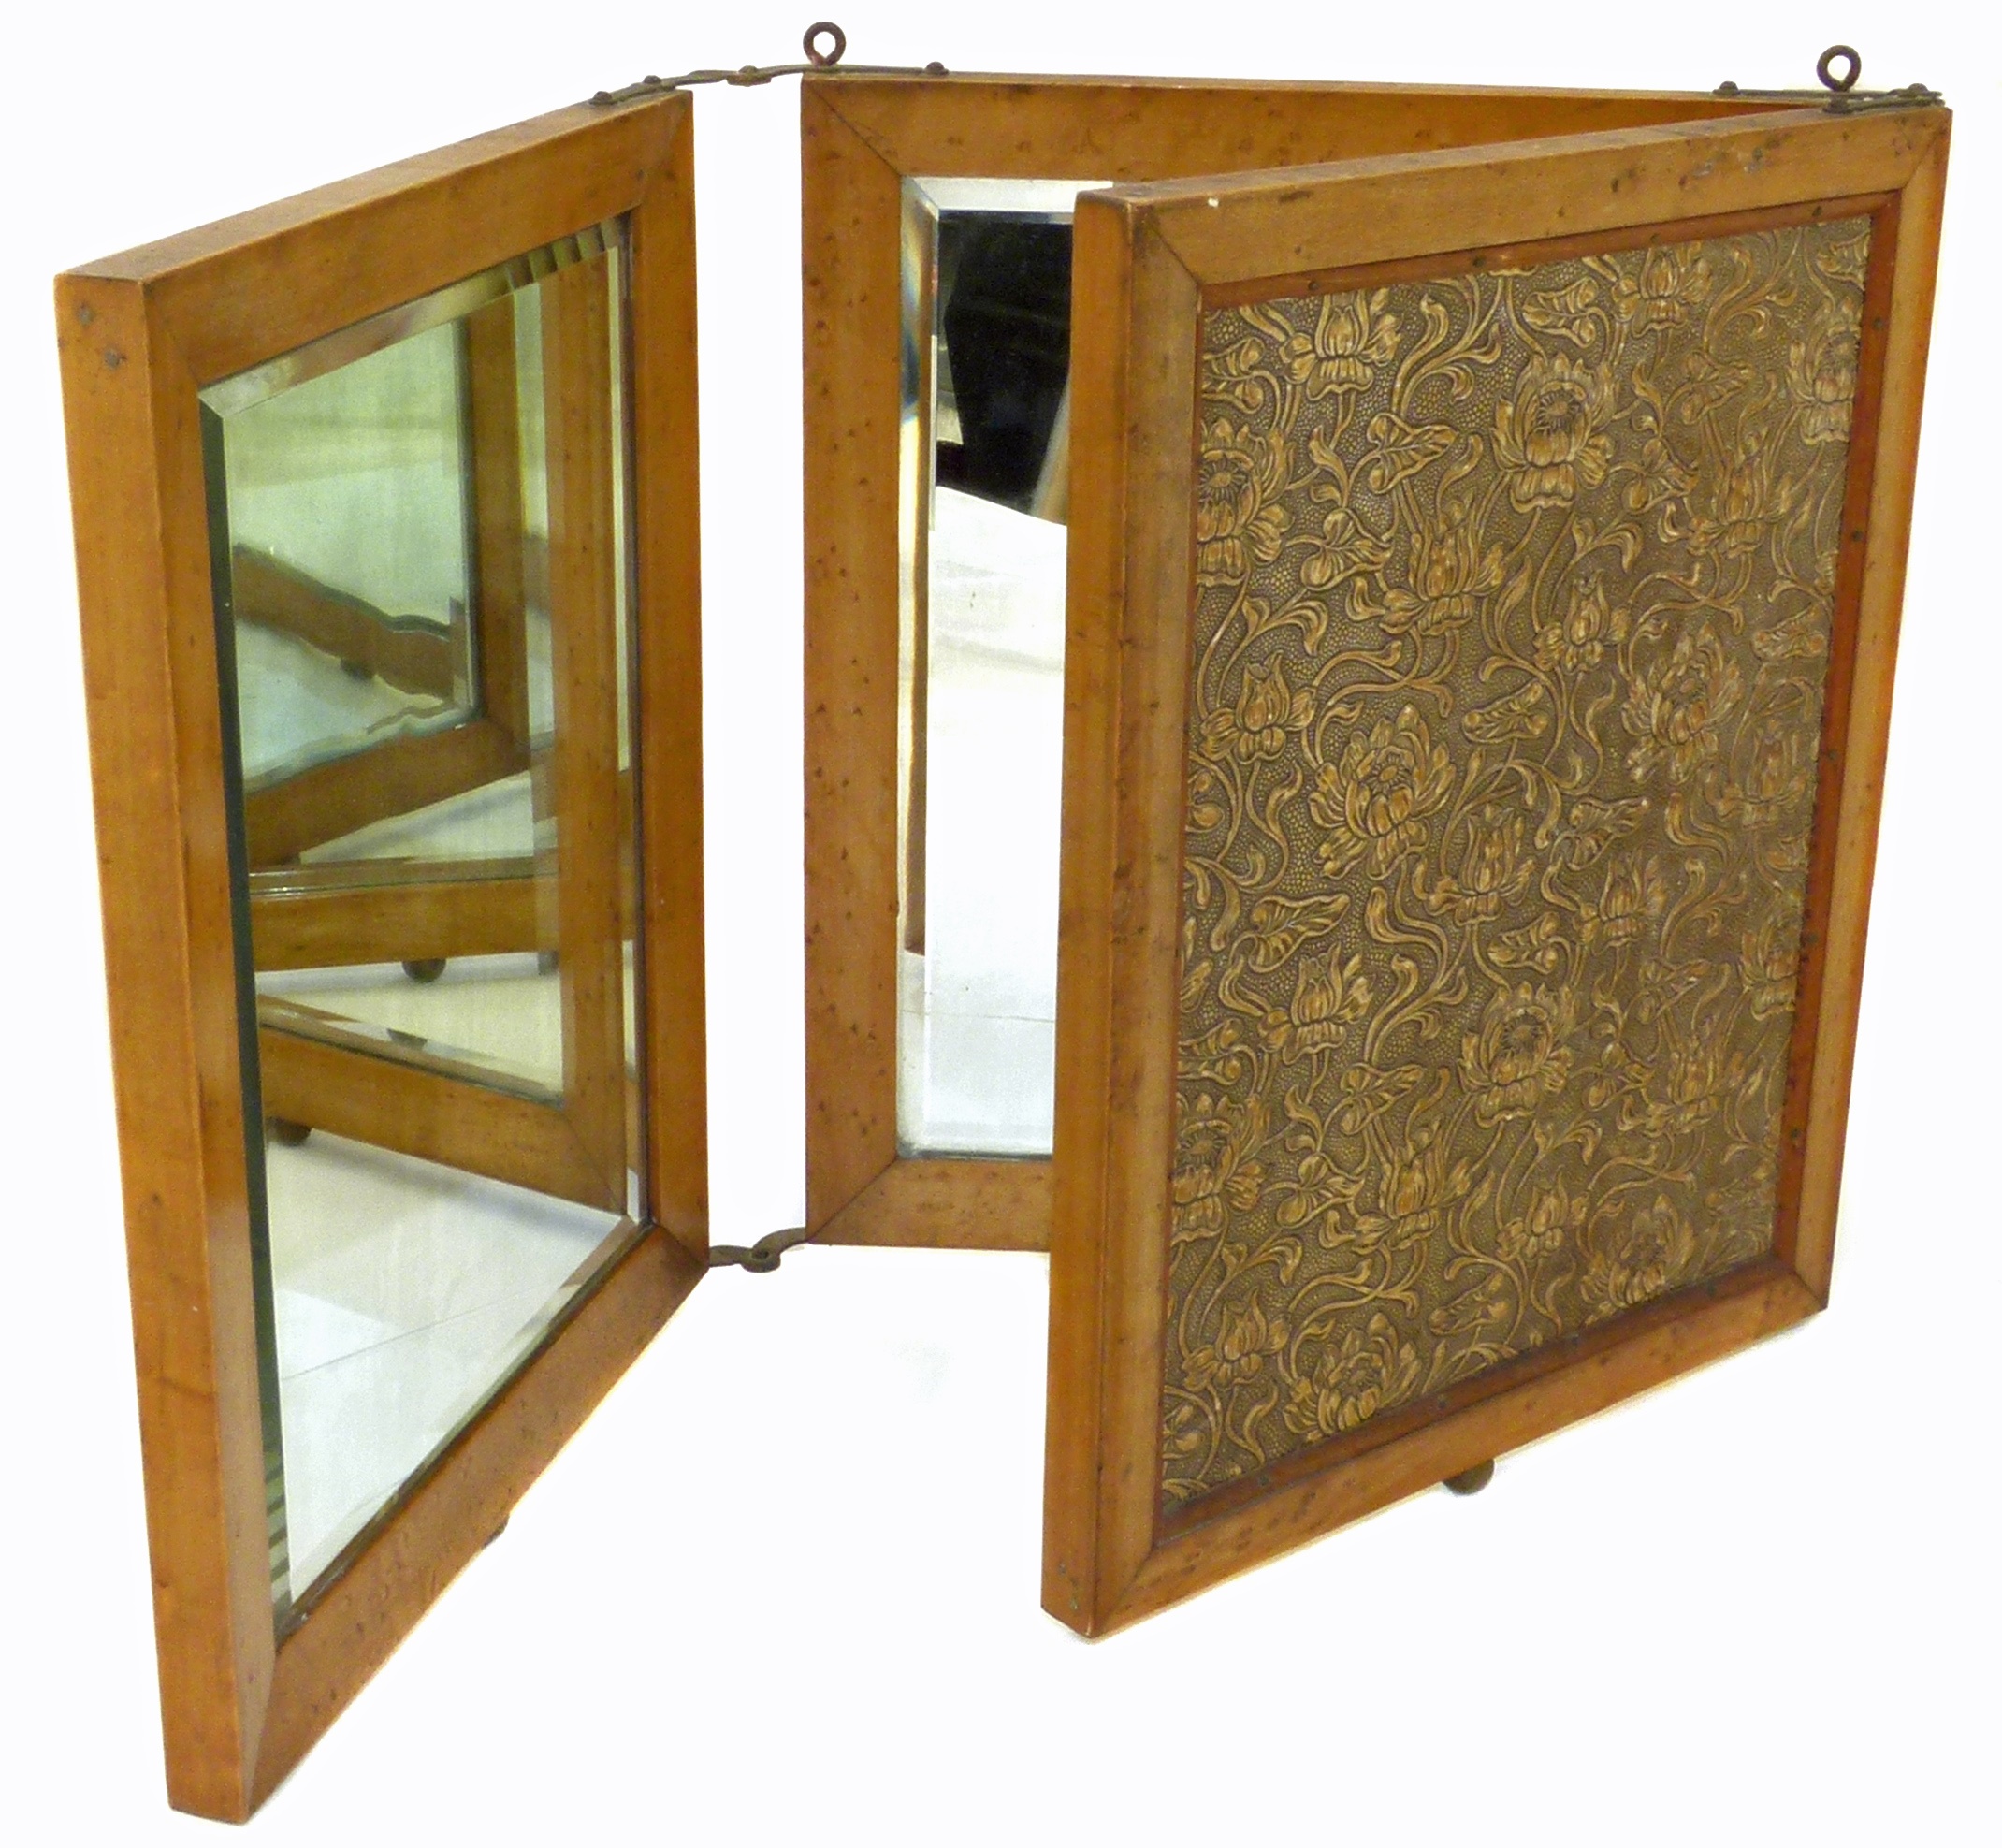 Victorian travel mirror with birds eye maple frame Condition reports are not available for our